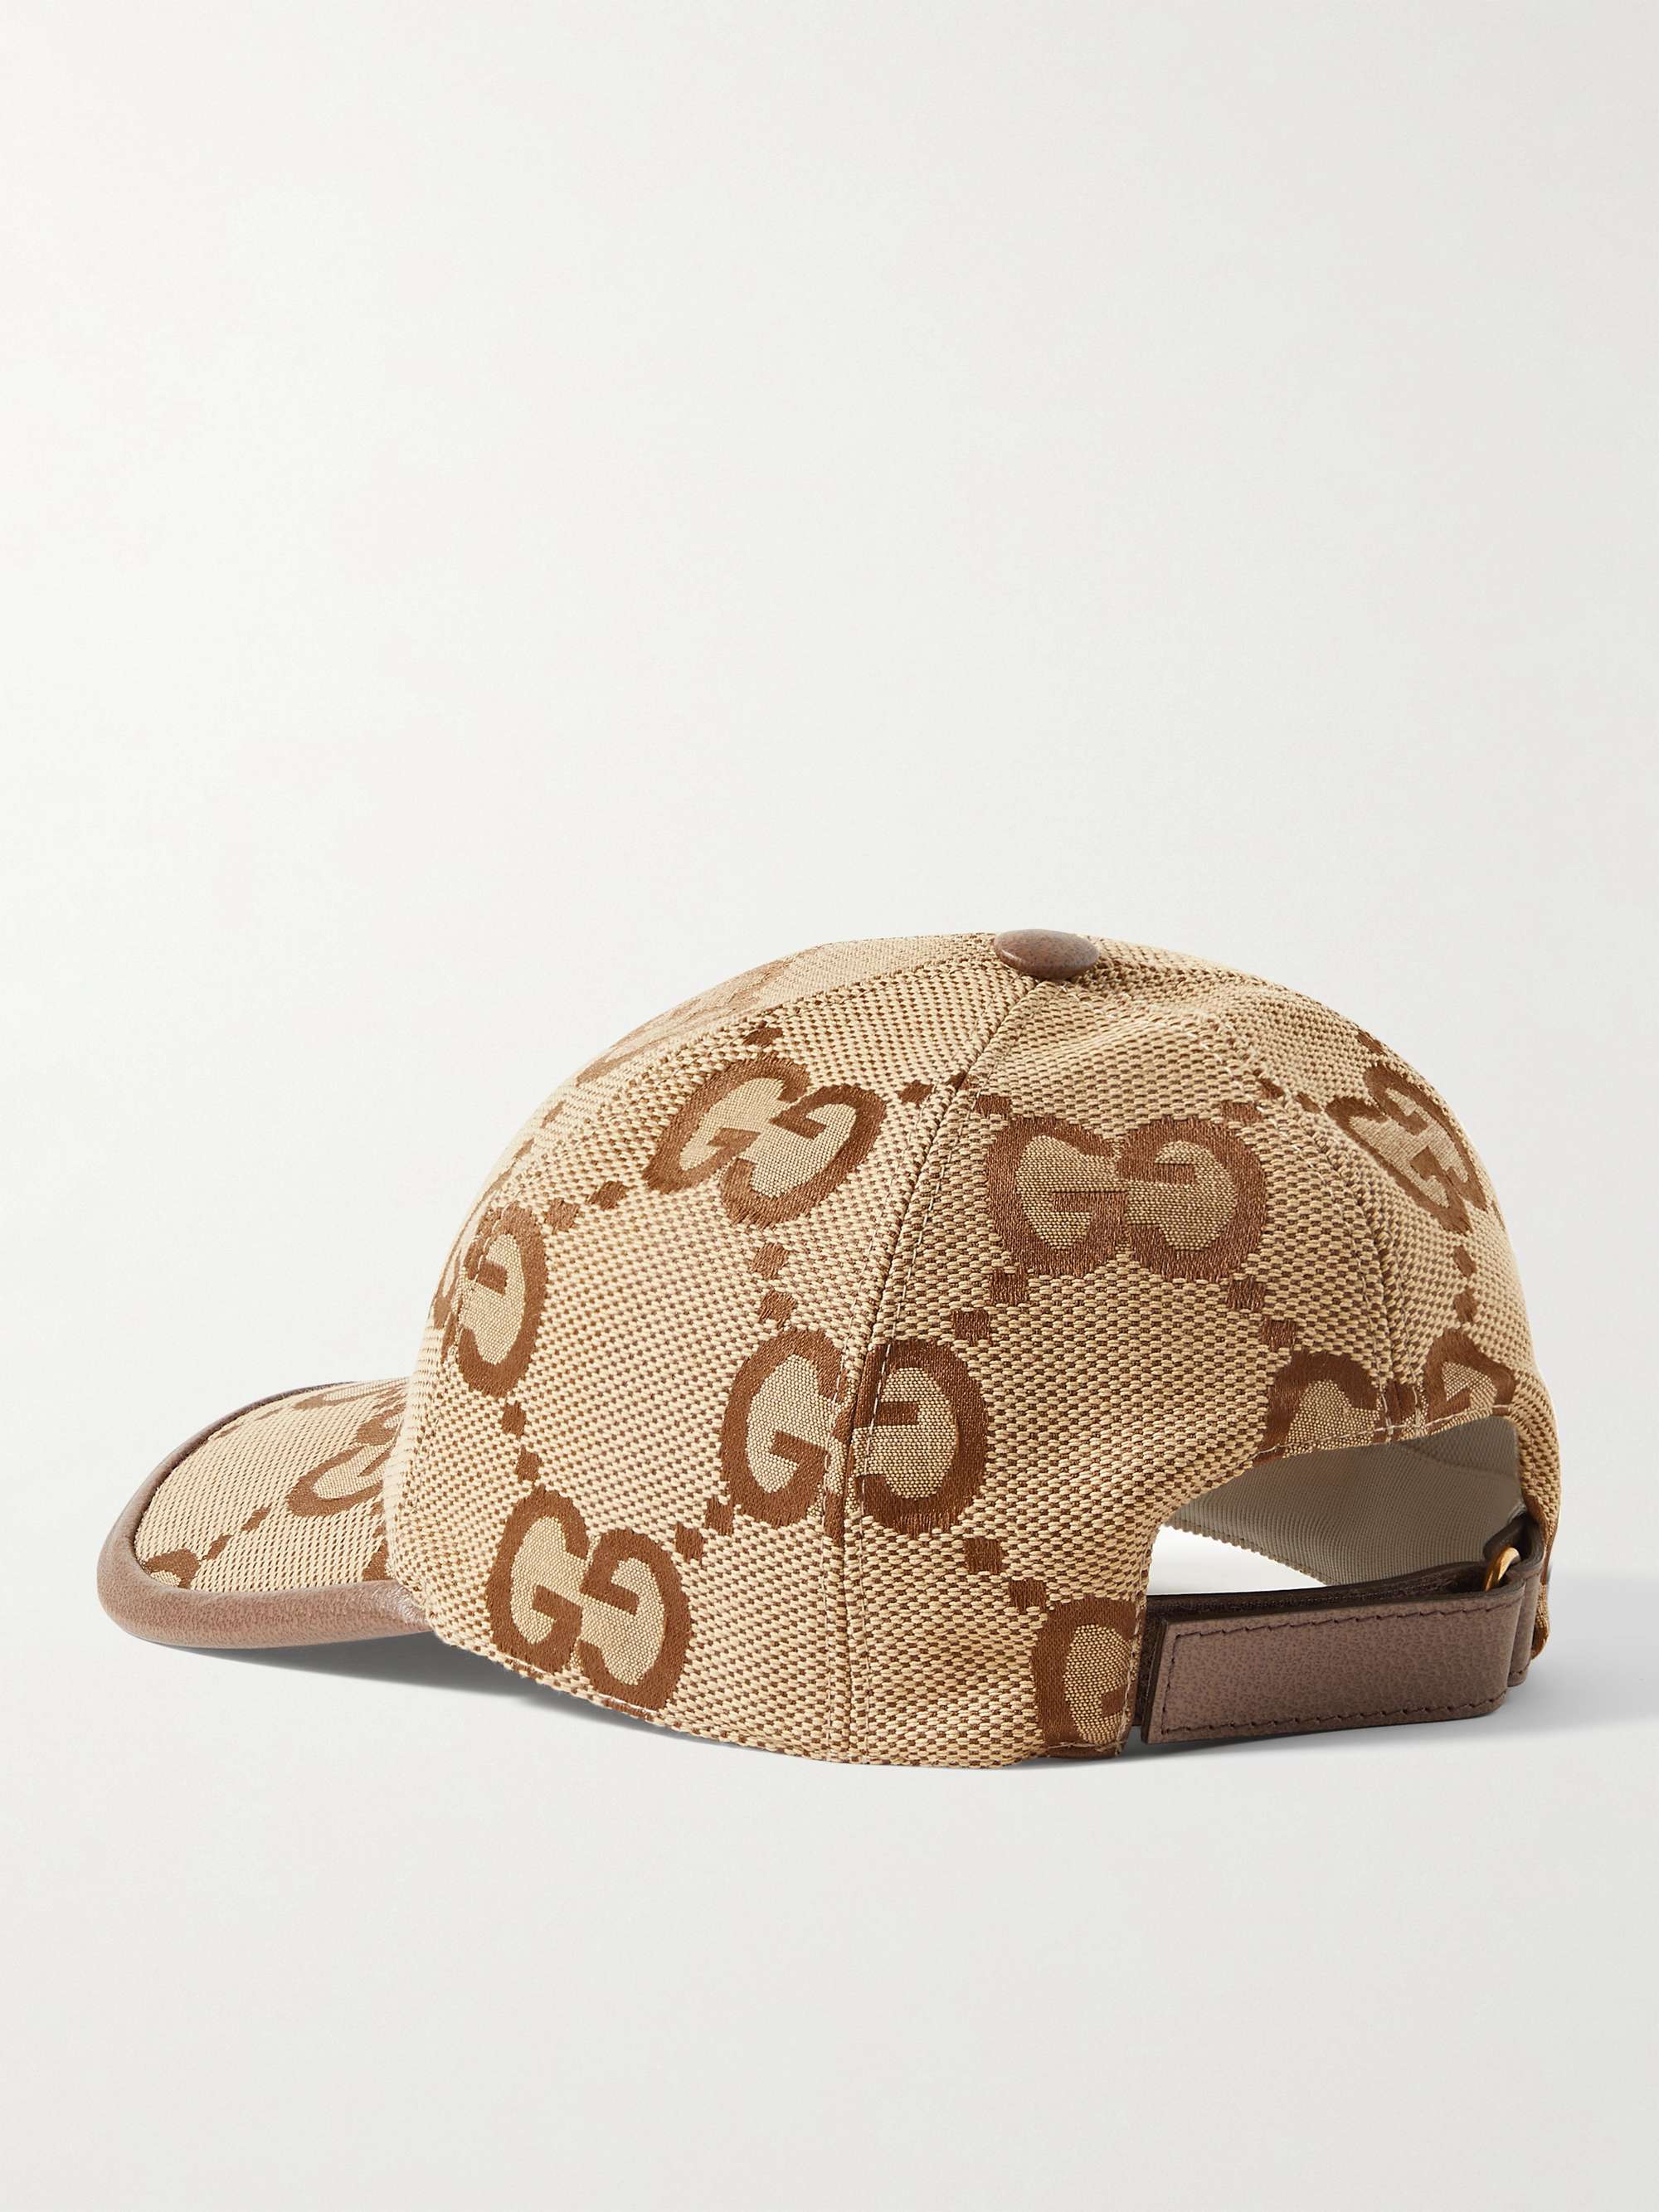 GUCCI Leather-Trimmed Monogrammed Canvas Baseball Cap